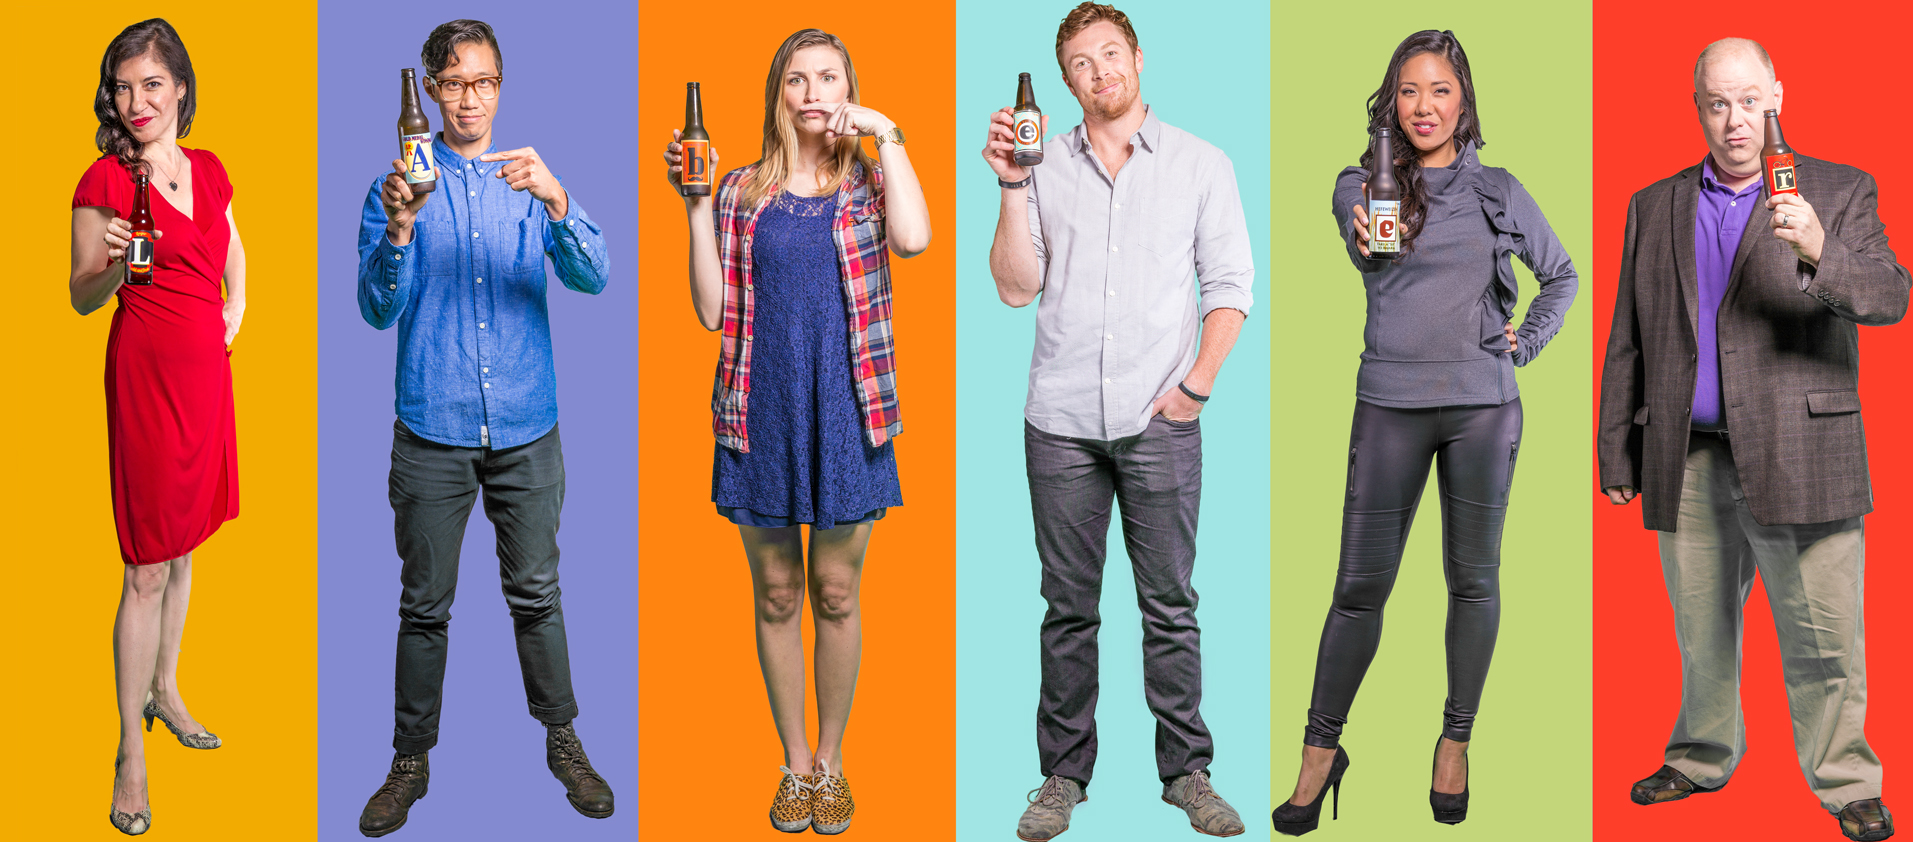 , LA Beer: Great Craft Brews or a New Comedy Series? Both!